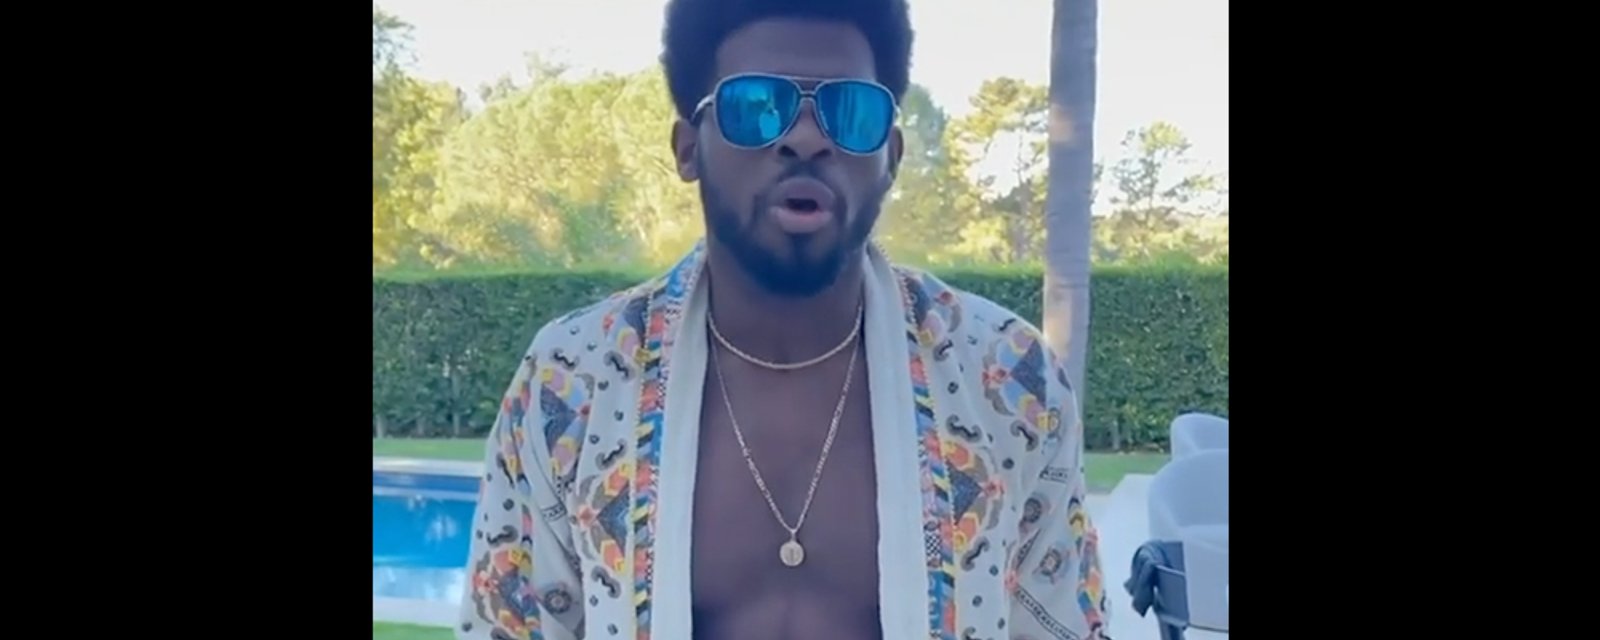 P.K. Subban channels his inner Nature Boy, cuts incredible WWE-style promo